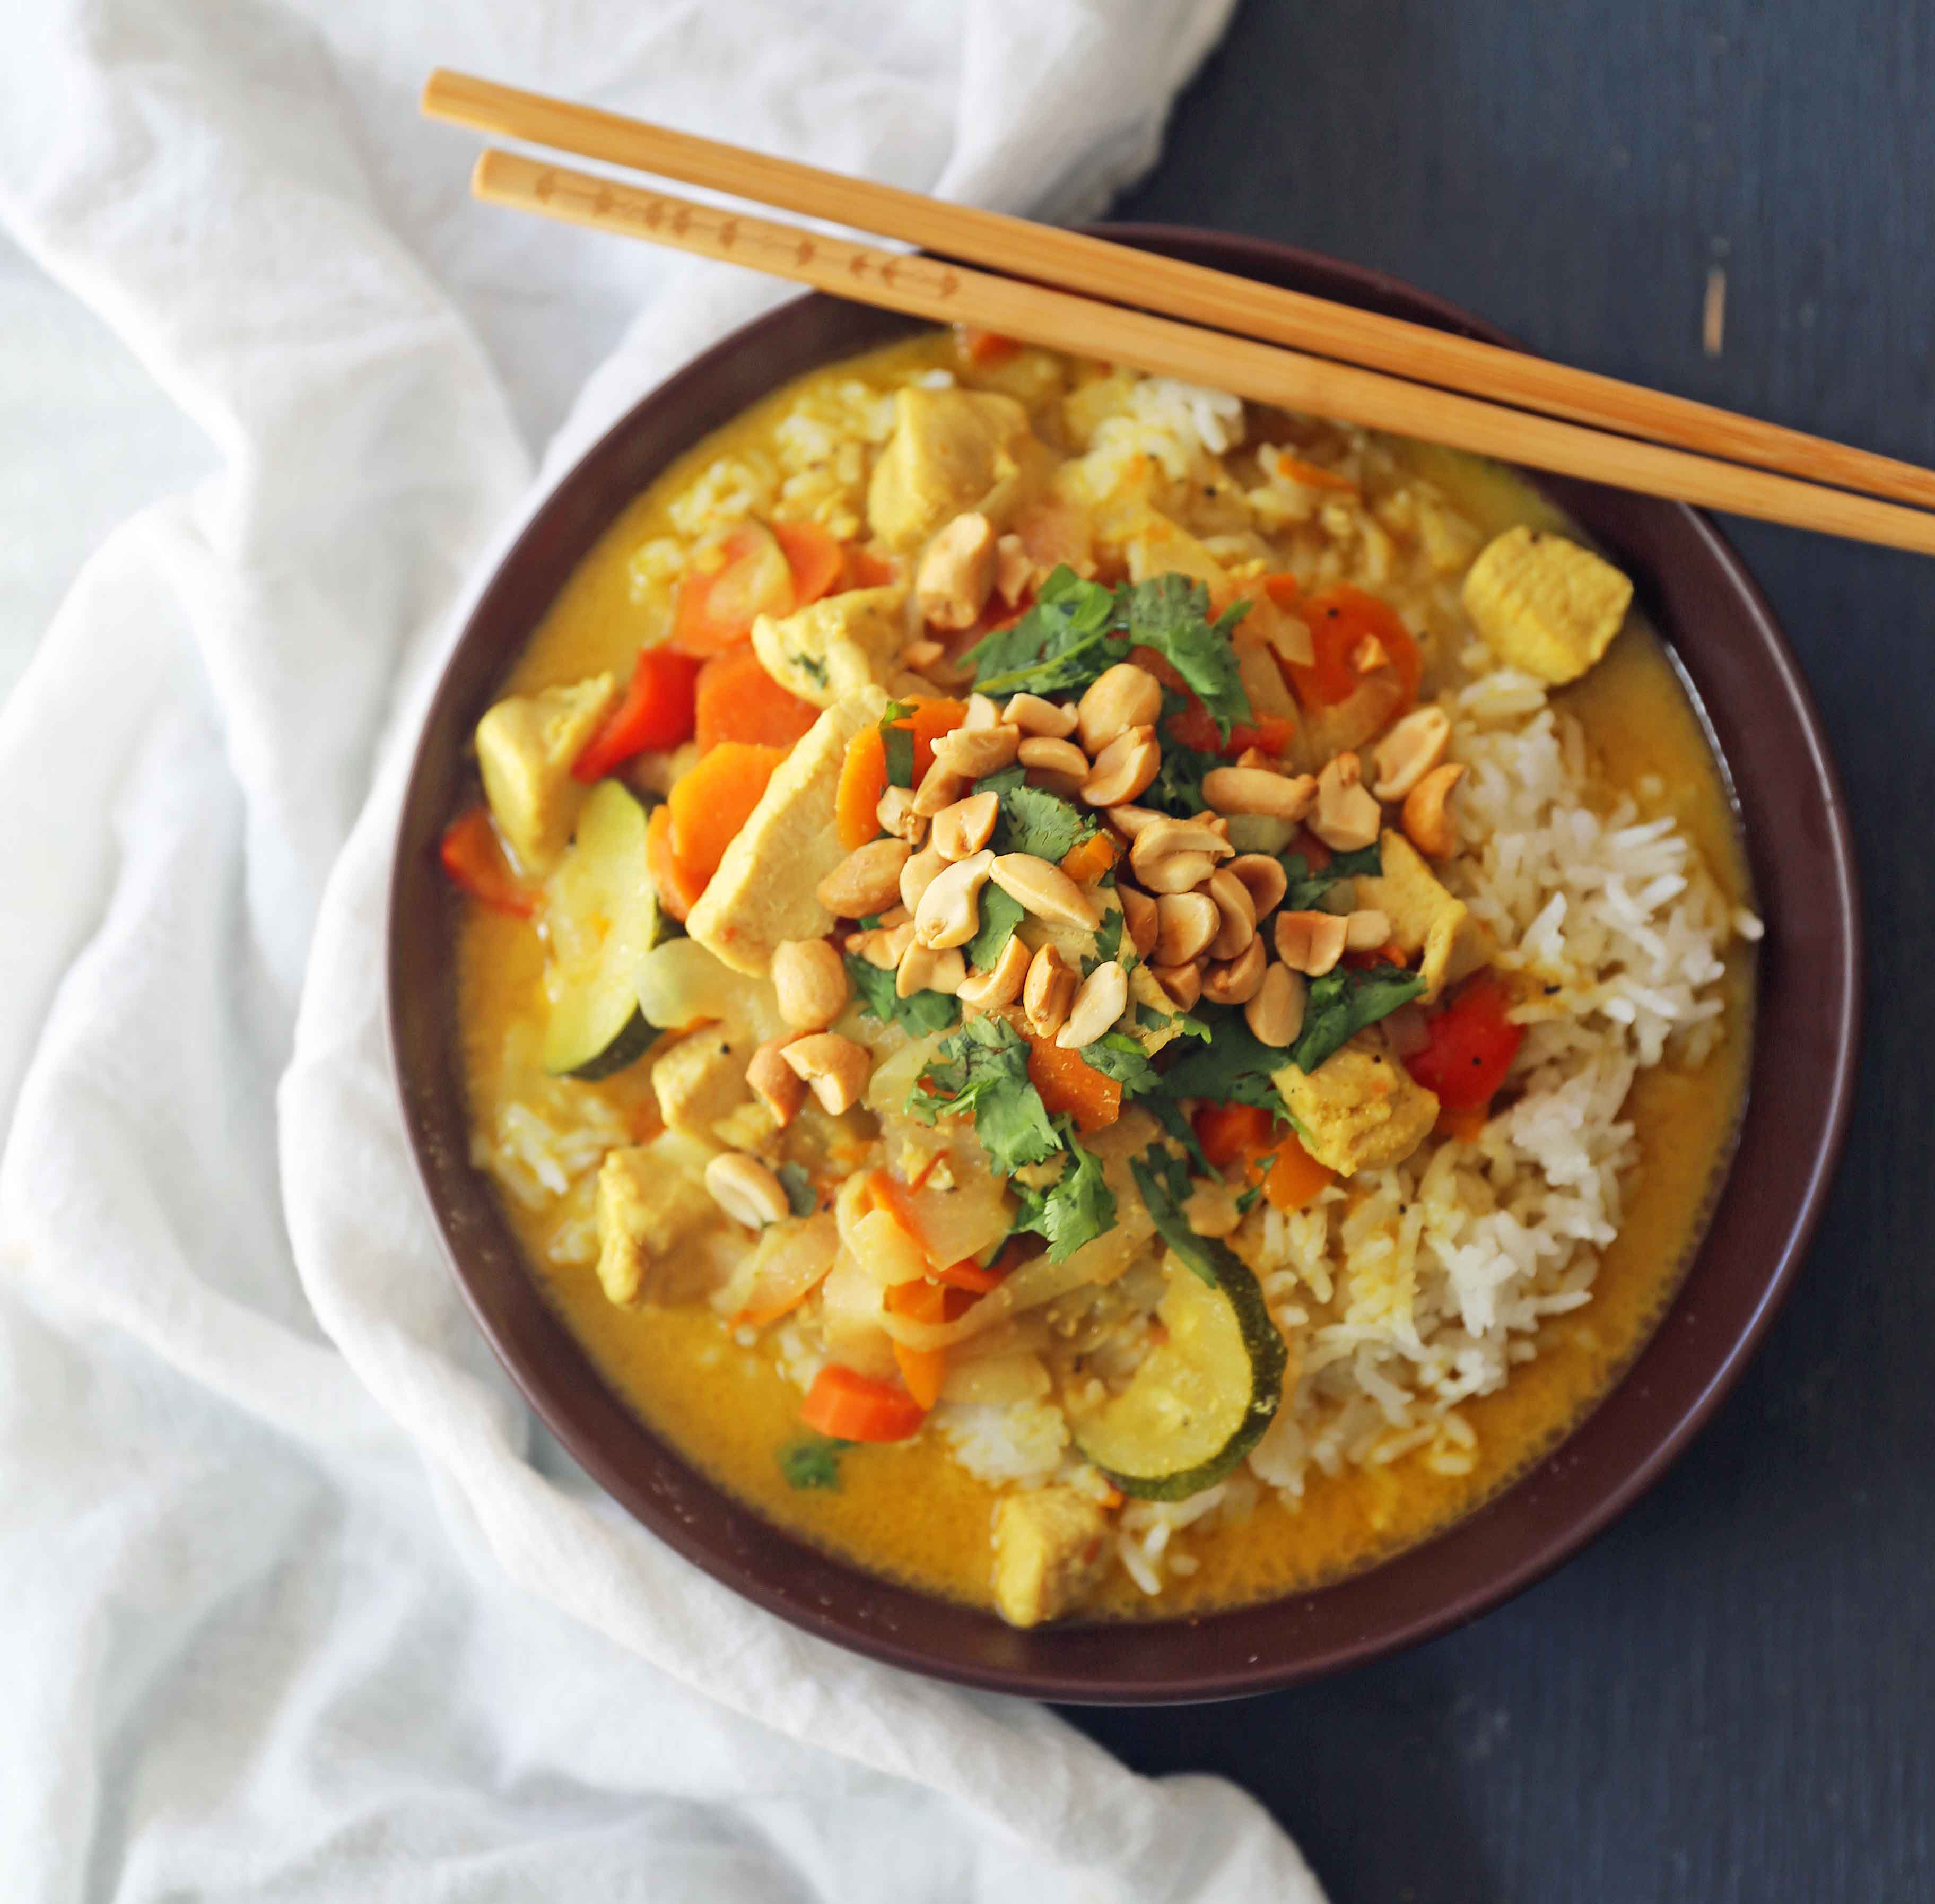 Thai Green Curry with Chicken and Veggies. A healthy gluten-free and dairy-free curry recipe. Chicken Curry with Vegetables in a Coconut Broth. www.modernhoney.com #curry #chickencurry #glutenfree #dairyfree #thaicurry